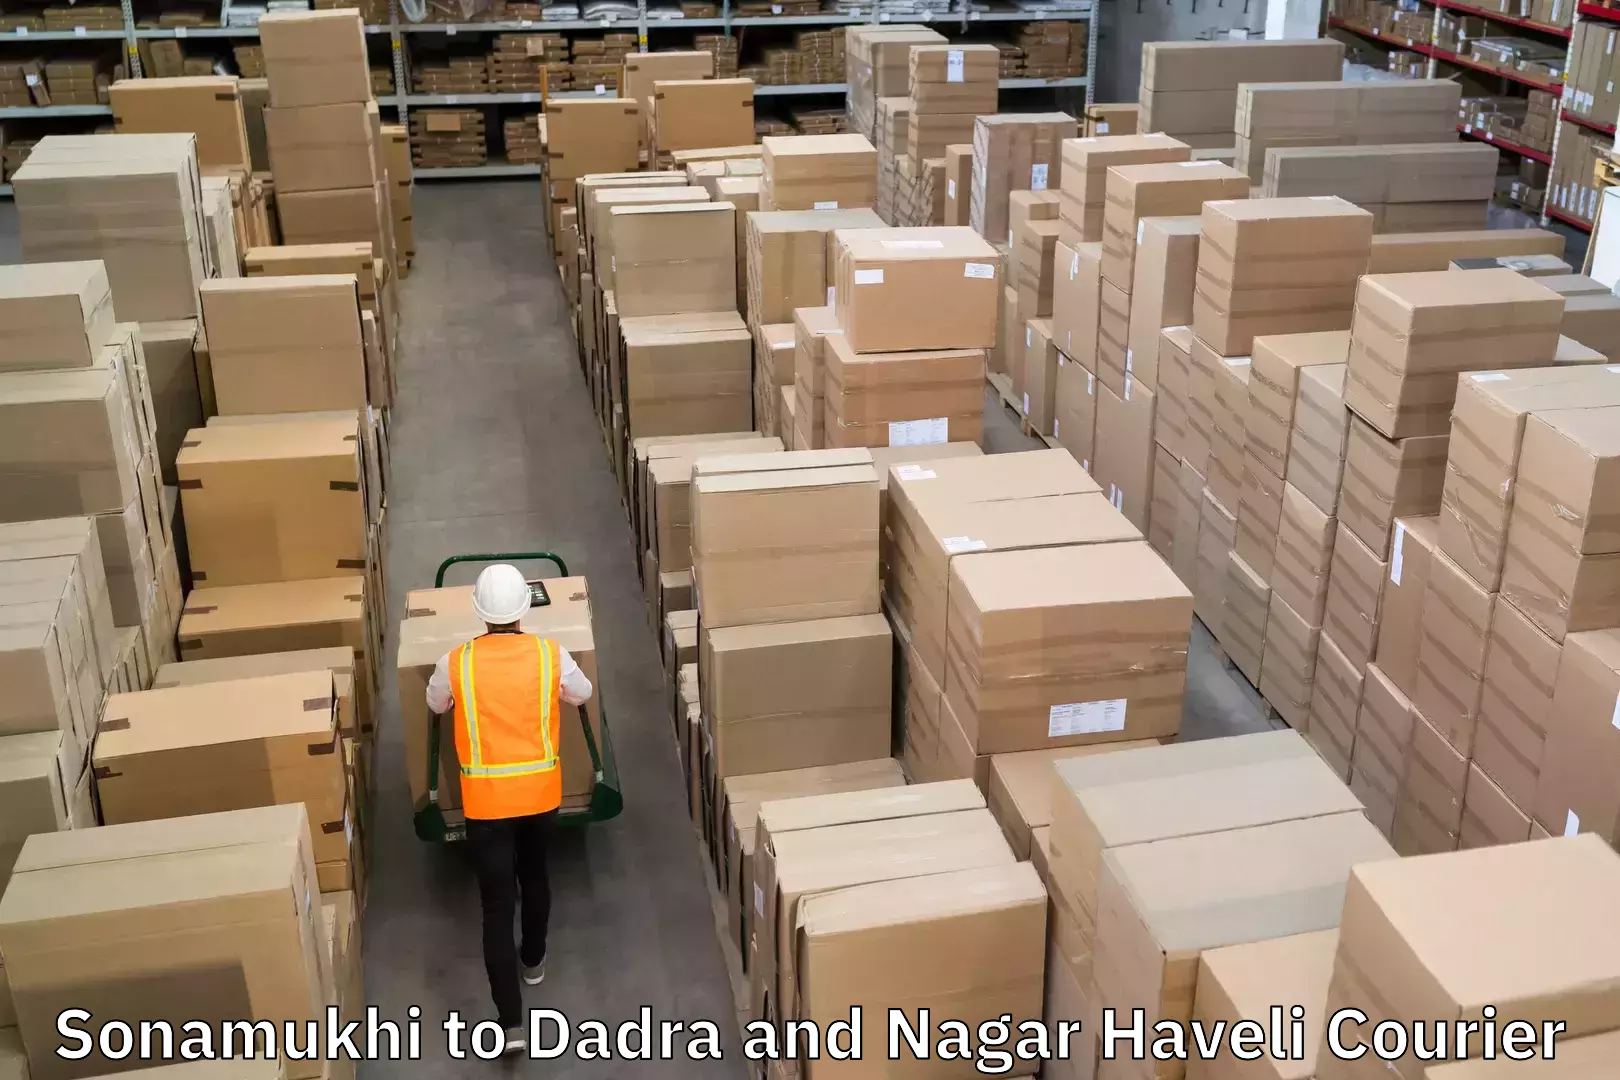 Efficient parcel delivery in Sonamukhi to Dadra and Nagar Haveli